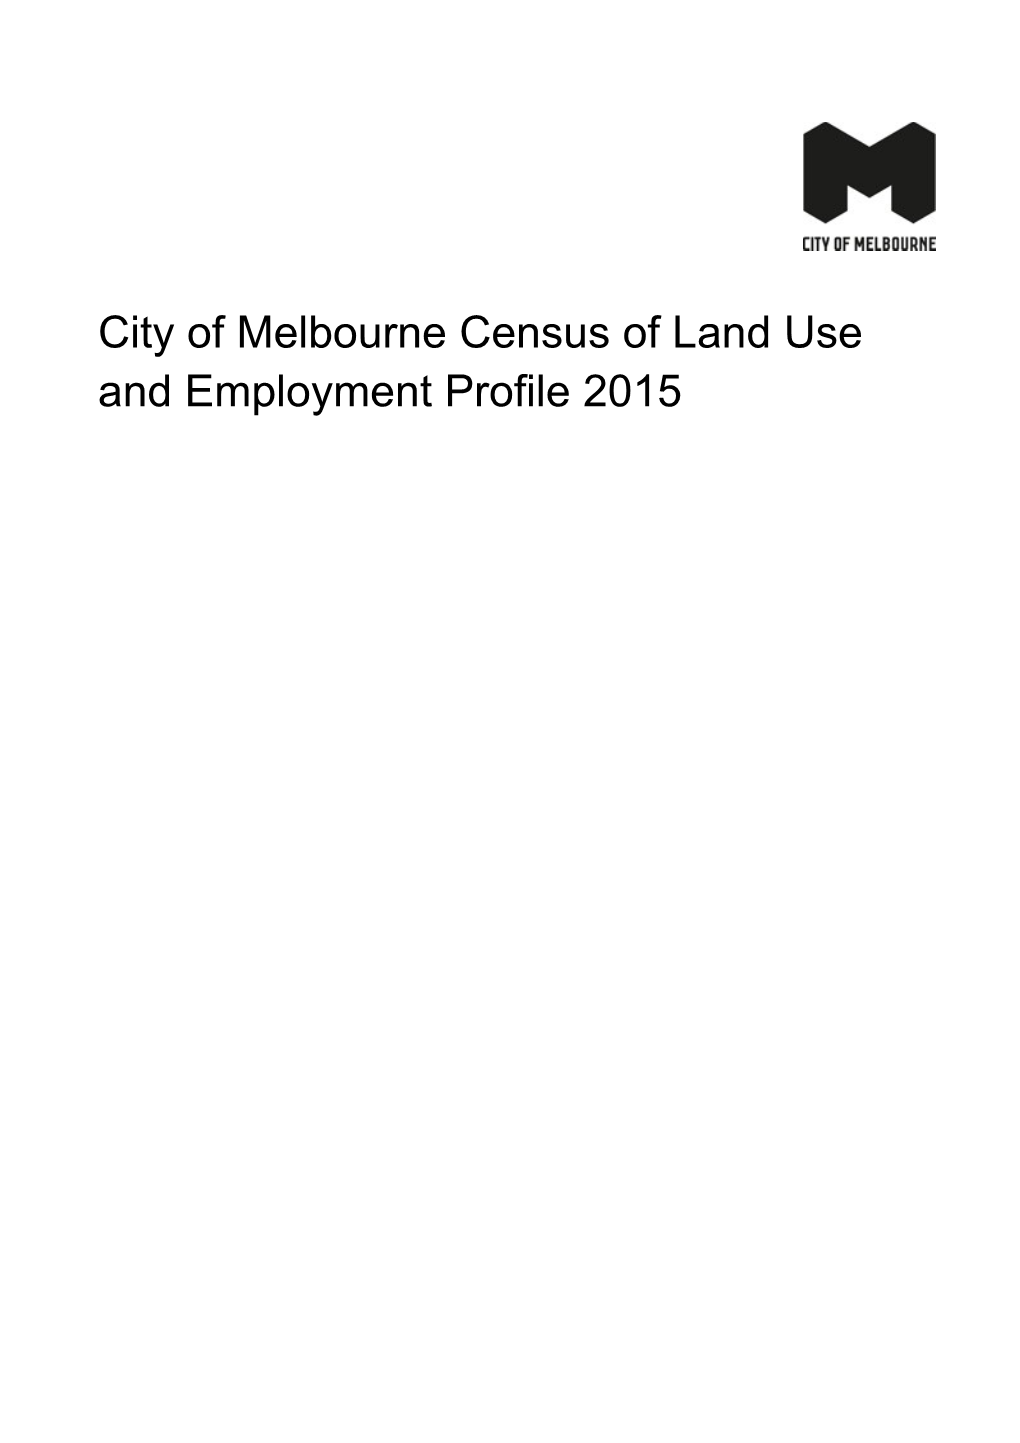 City of Melbourne Census of Land Use and Employment Profile 2015